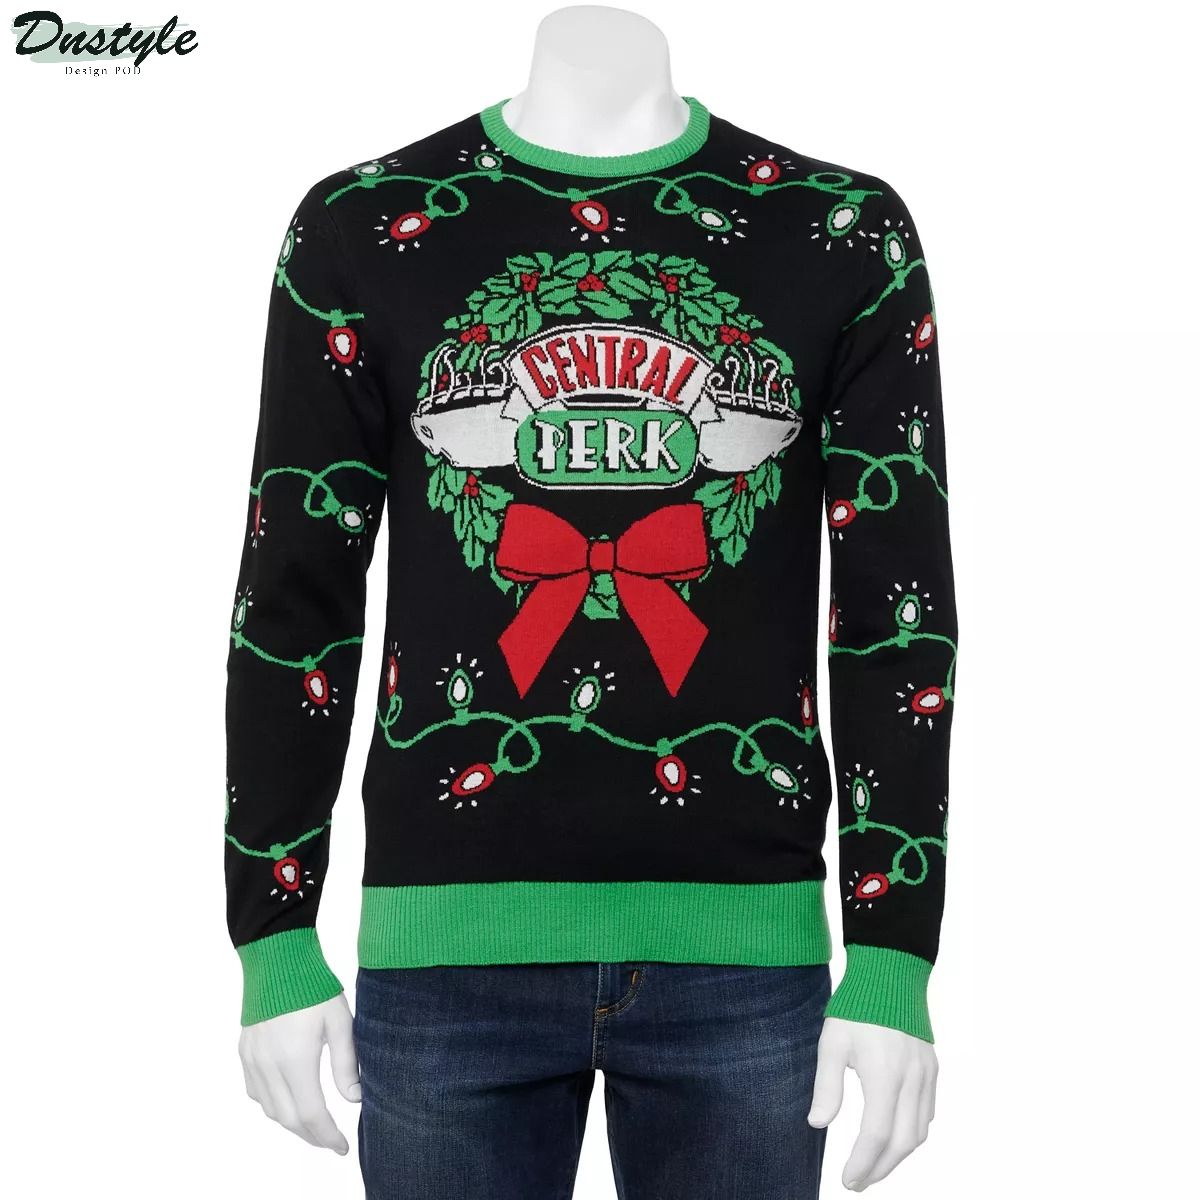 Central perk ugly christmas sweater